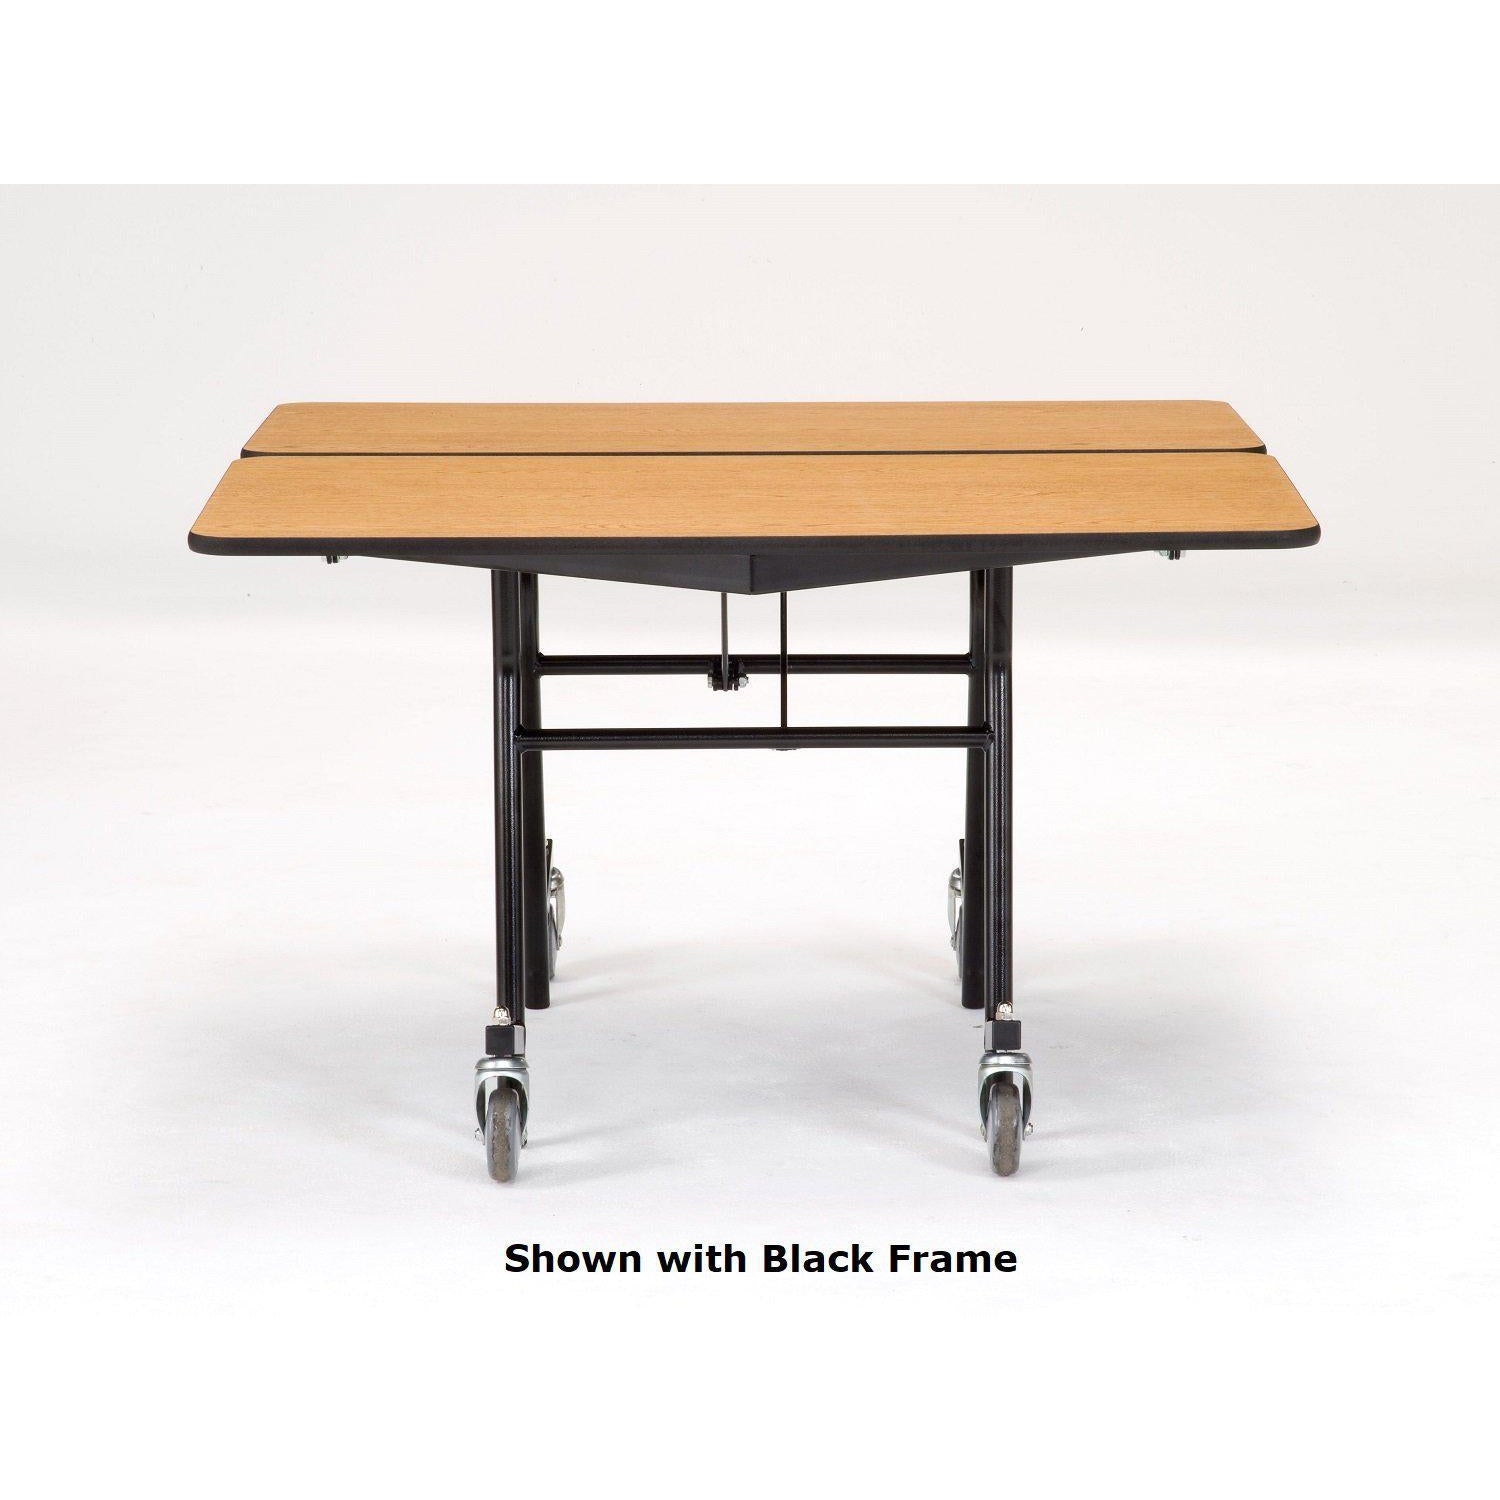 Mobile Shape Cafeteria Table, 60" Square, Plywood Core, Vinyl T-Mold Edge, Textured Black Frame